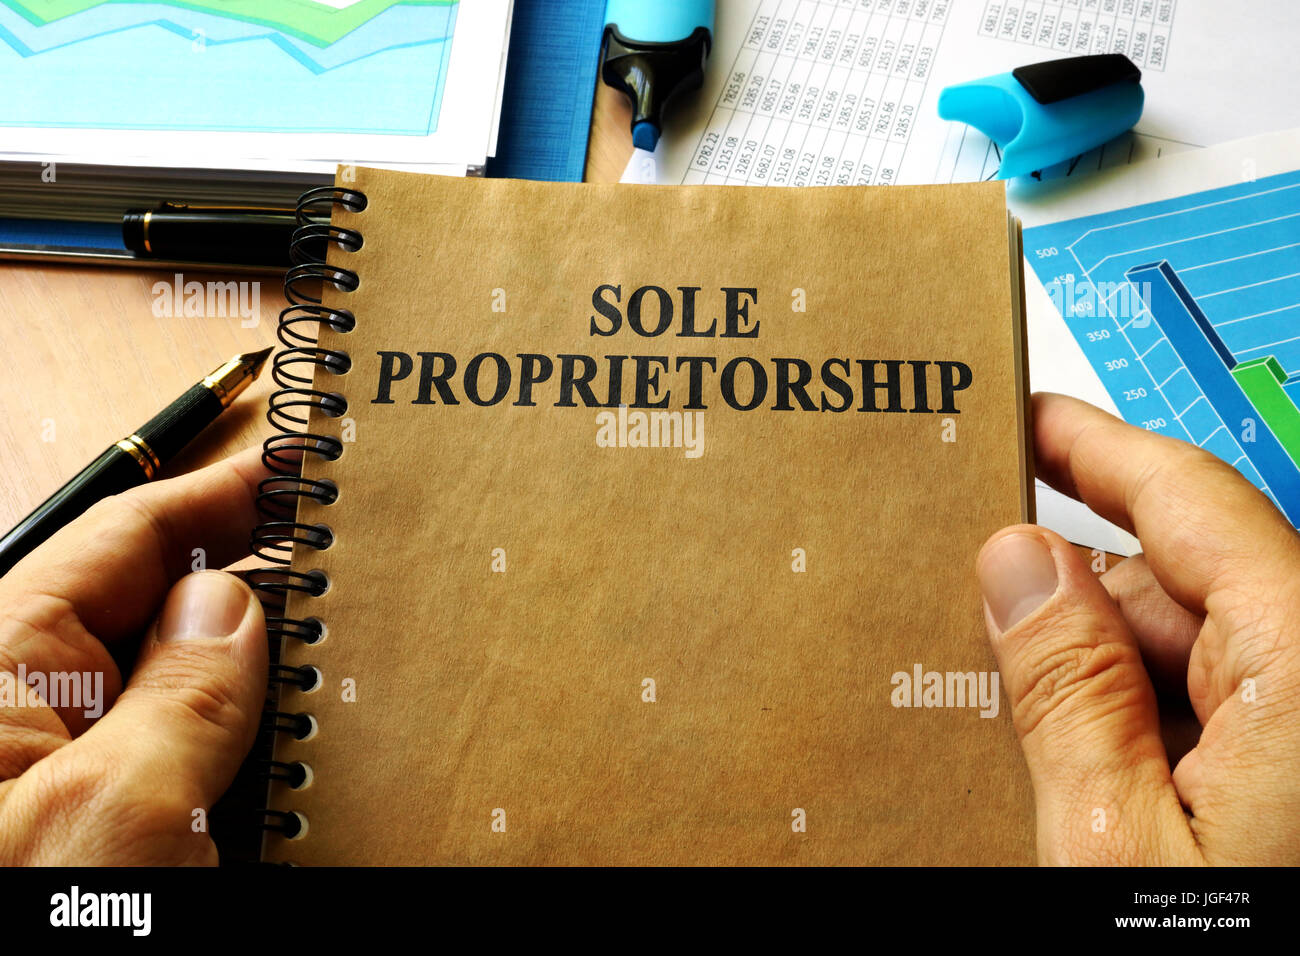 Hands holding book with title Sole proprietorship. Stock Photo